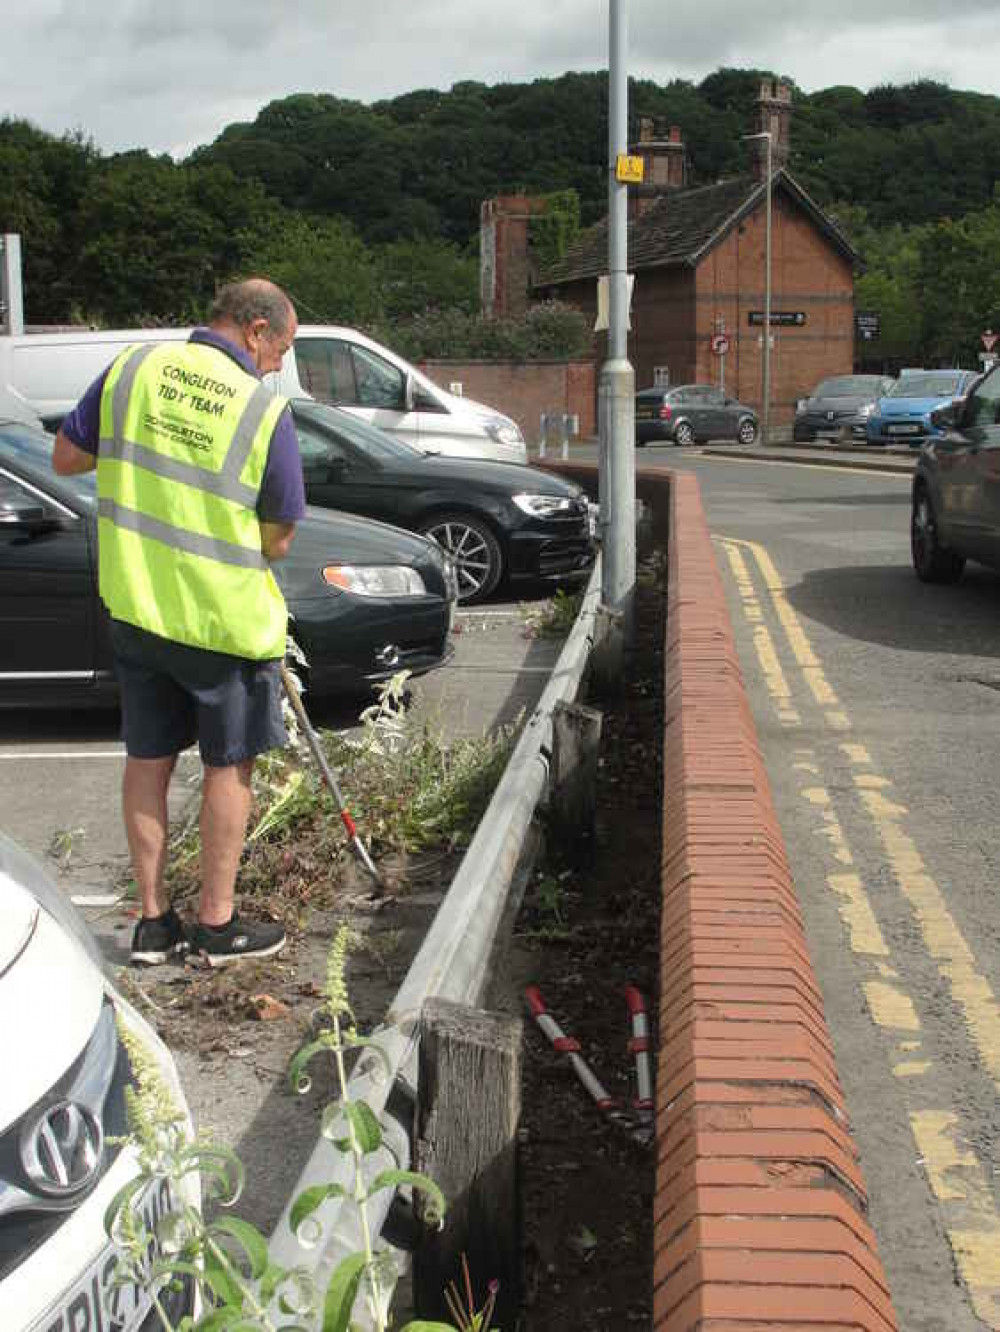 Cllr Brown removing weeds at Princess Street Car Park during a Congleton in Bloom Tidy Town Day.